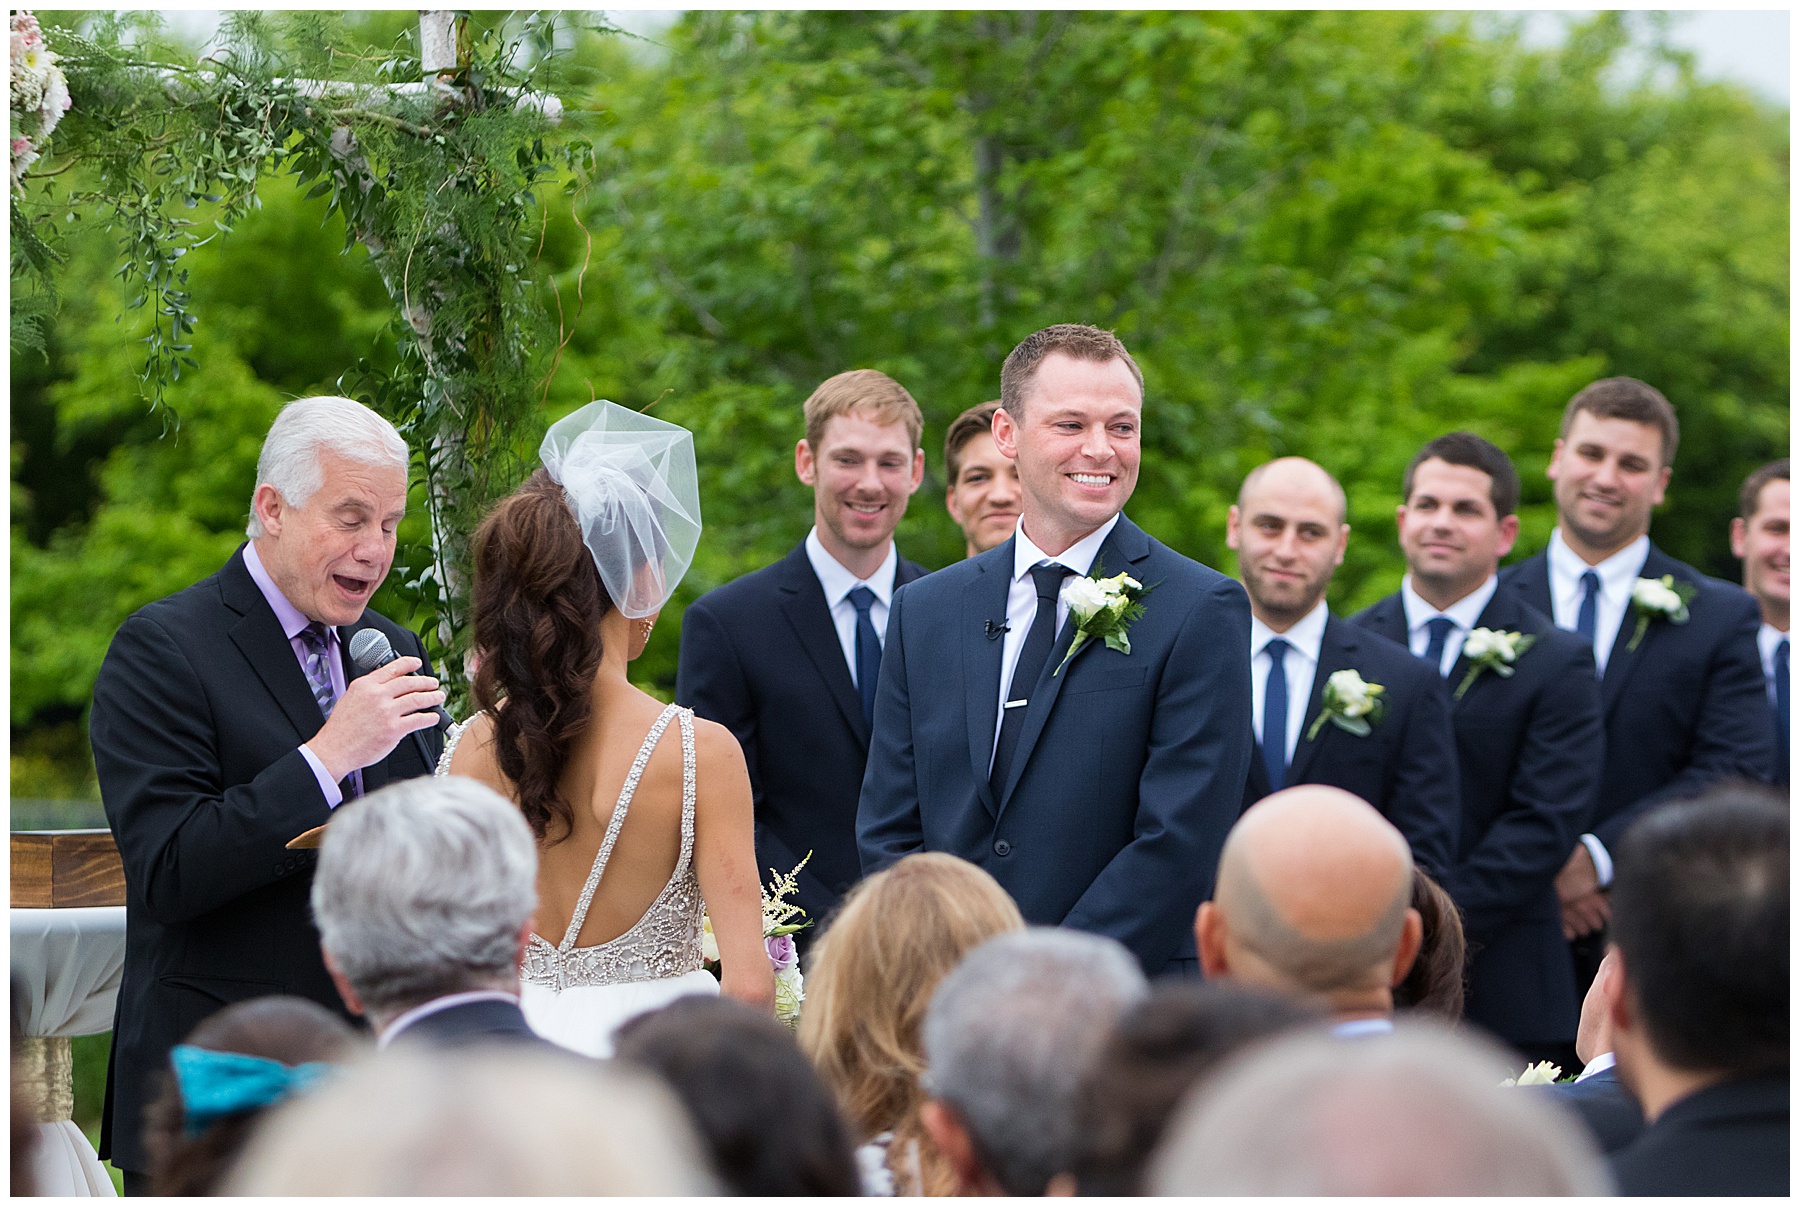 Groom smiling during ceremony